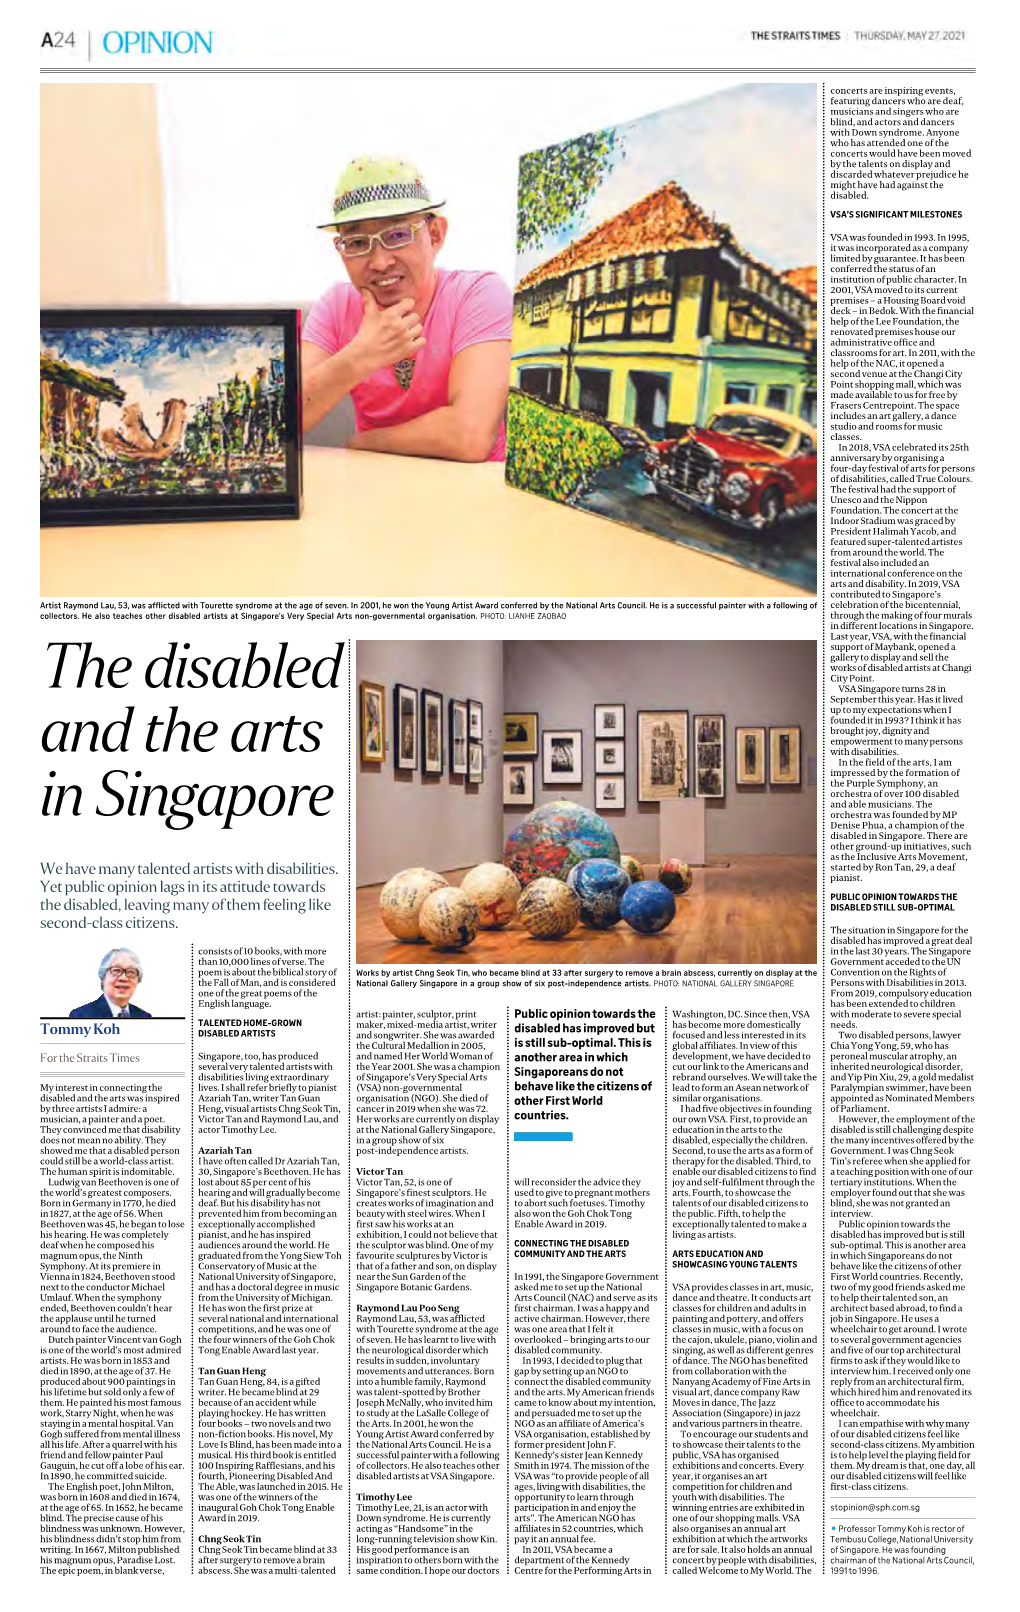 The Disabled and the Arts in Singapore